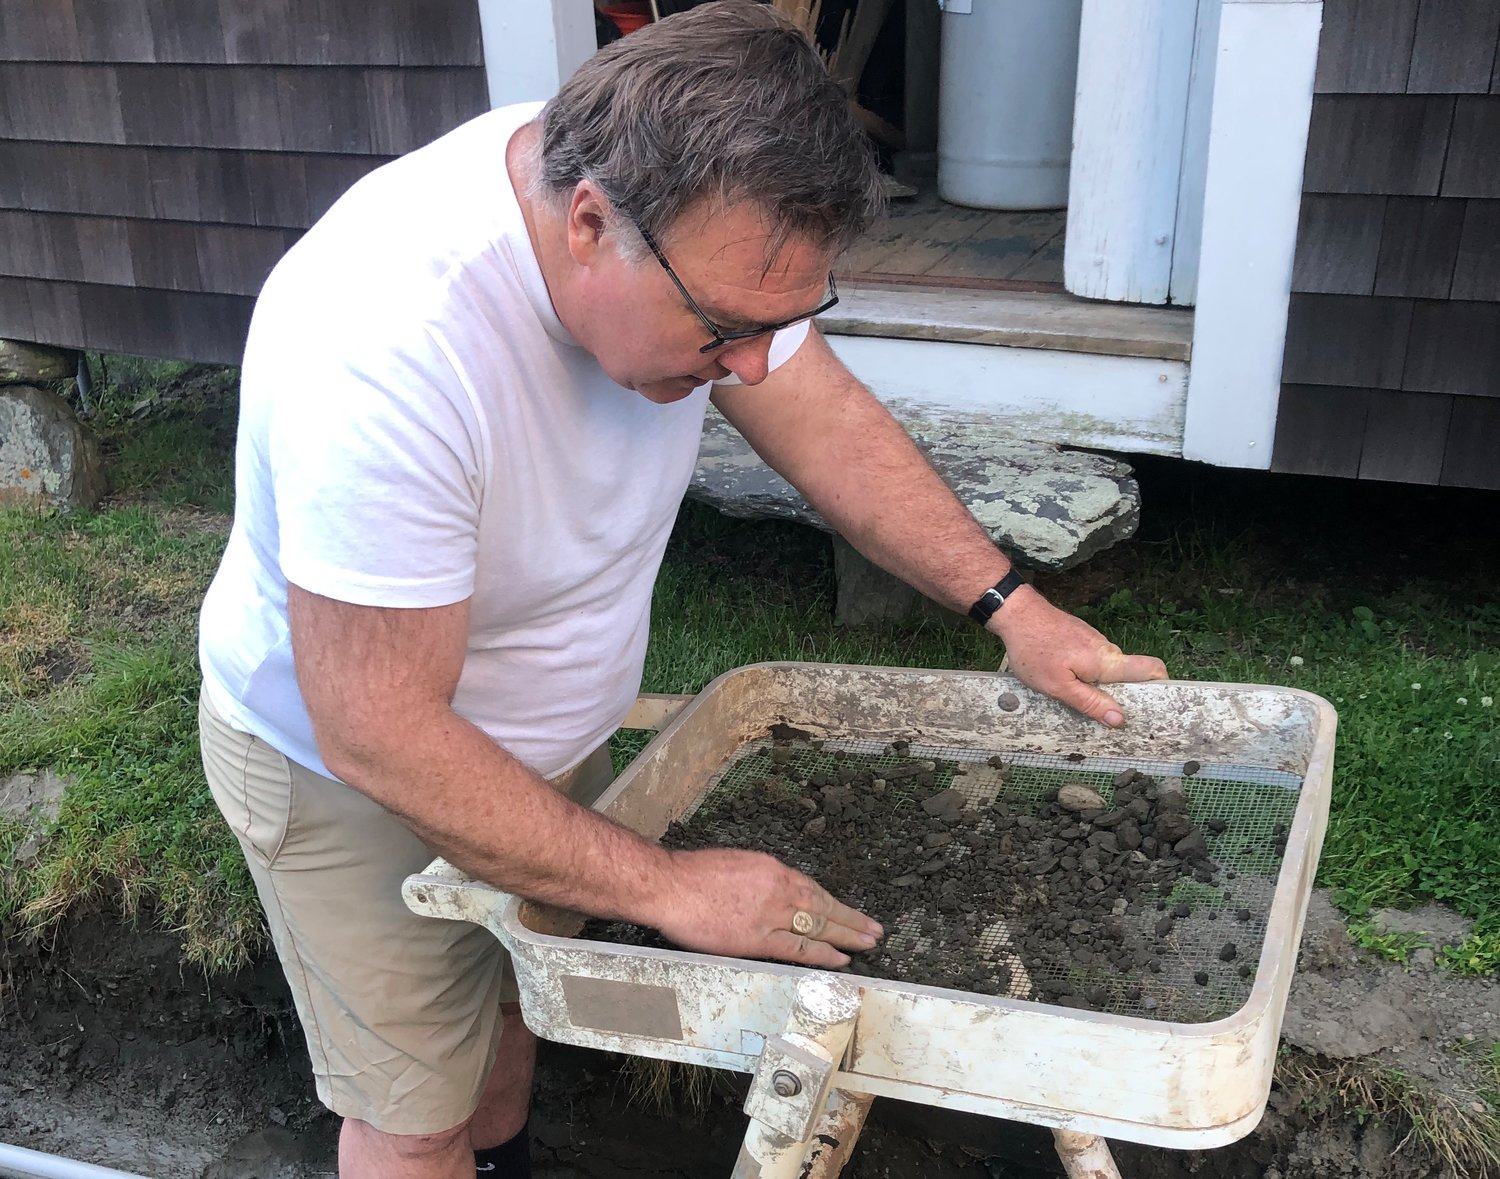 Tim O'Toole works a sifter to recover small artifacts from a construction trench at the Wilbor House.